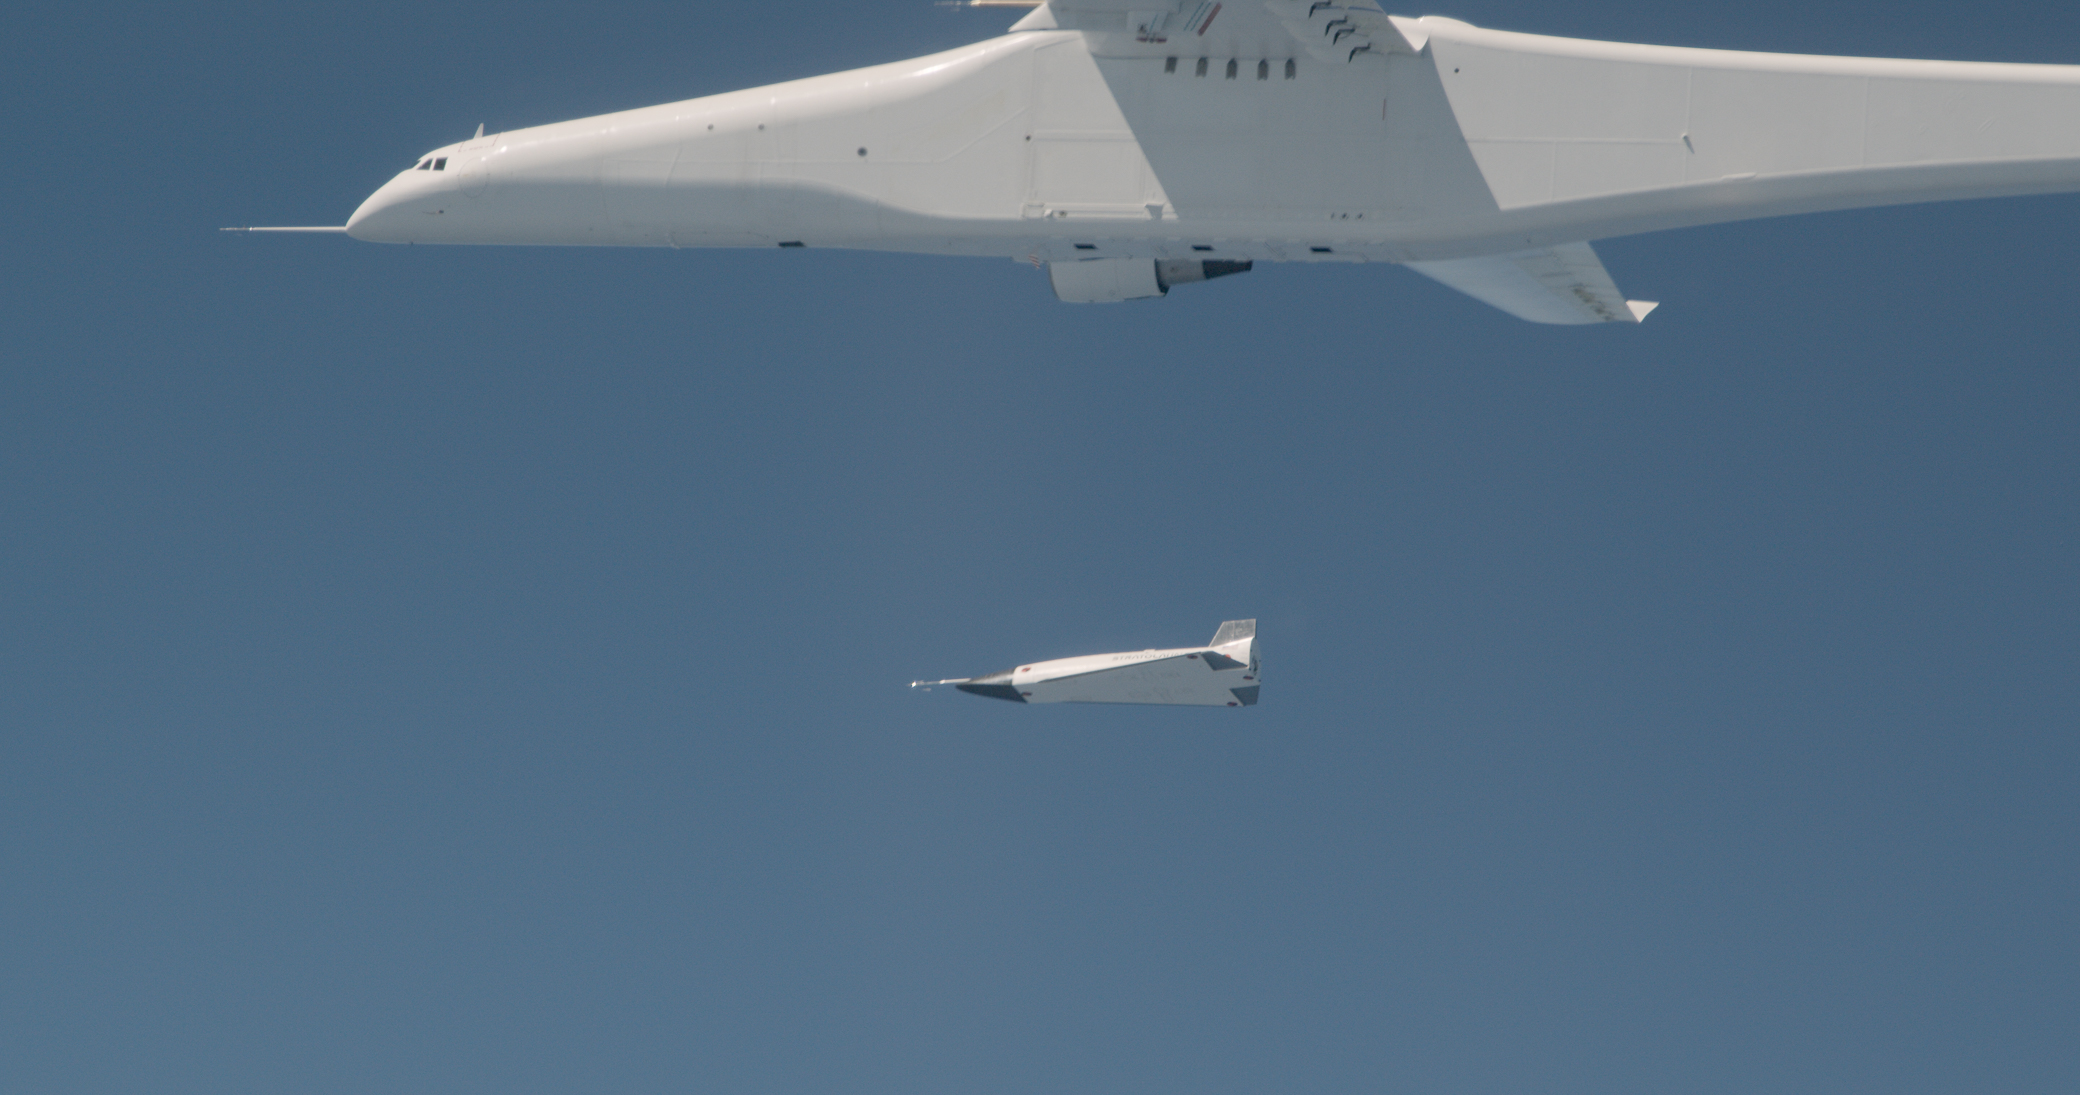 Stratolaunch Roc Aircraft Has Successfully Completed The Separation Test Of Talon A Vehicle